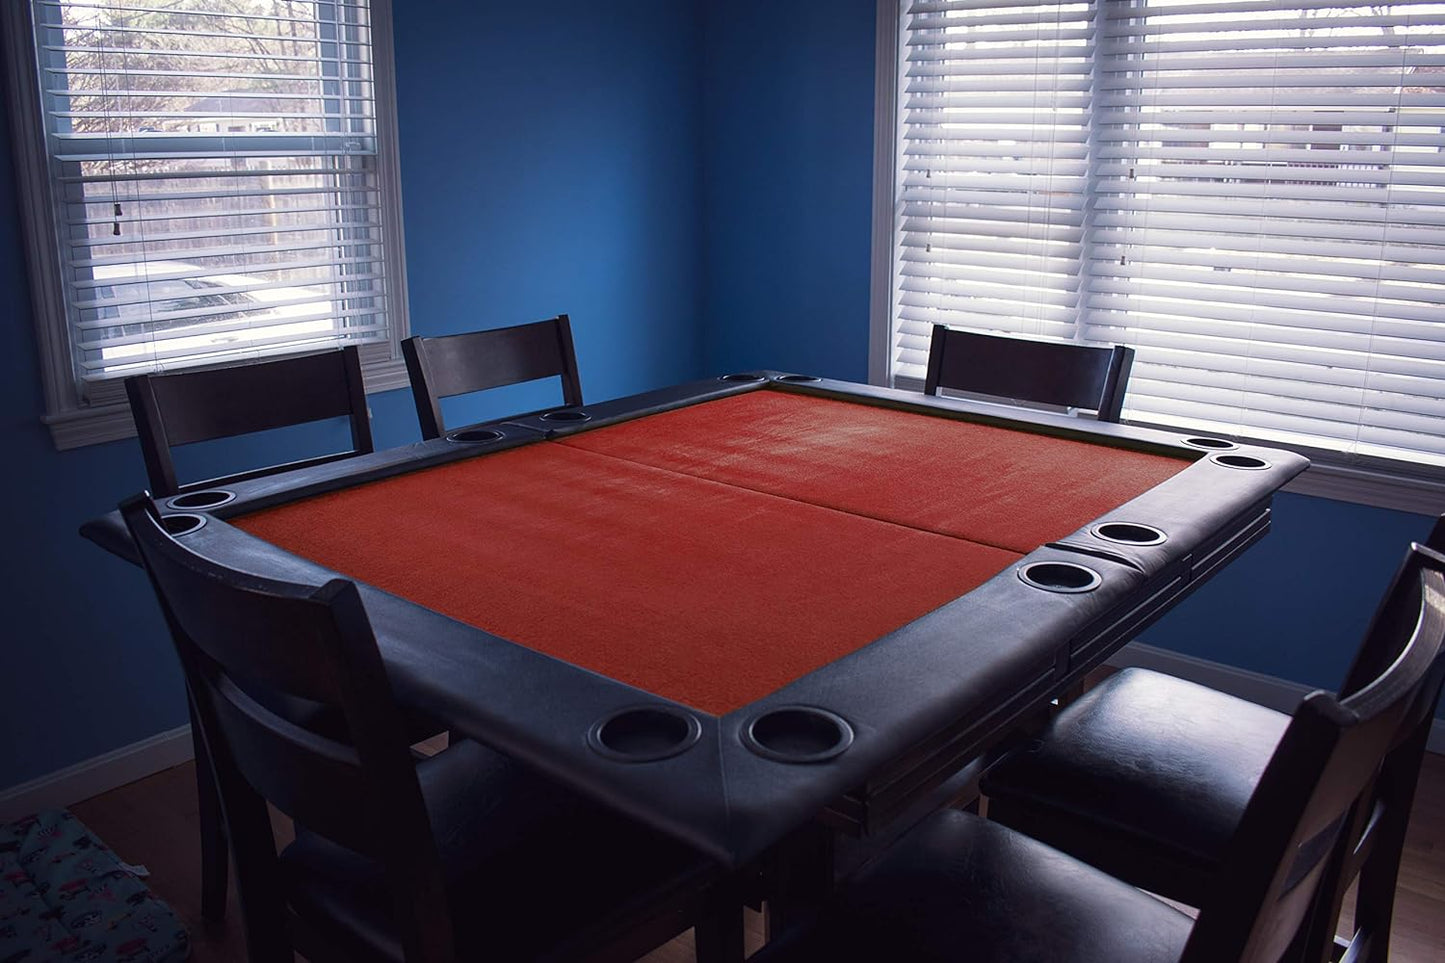 Game Night Table Topper 48"x60"